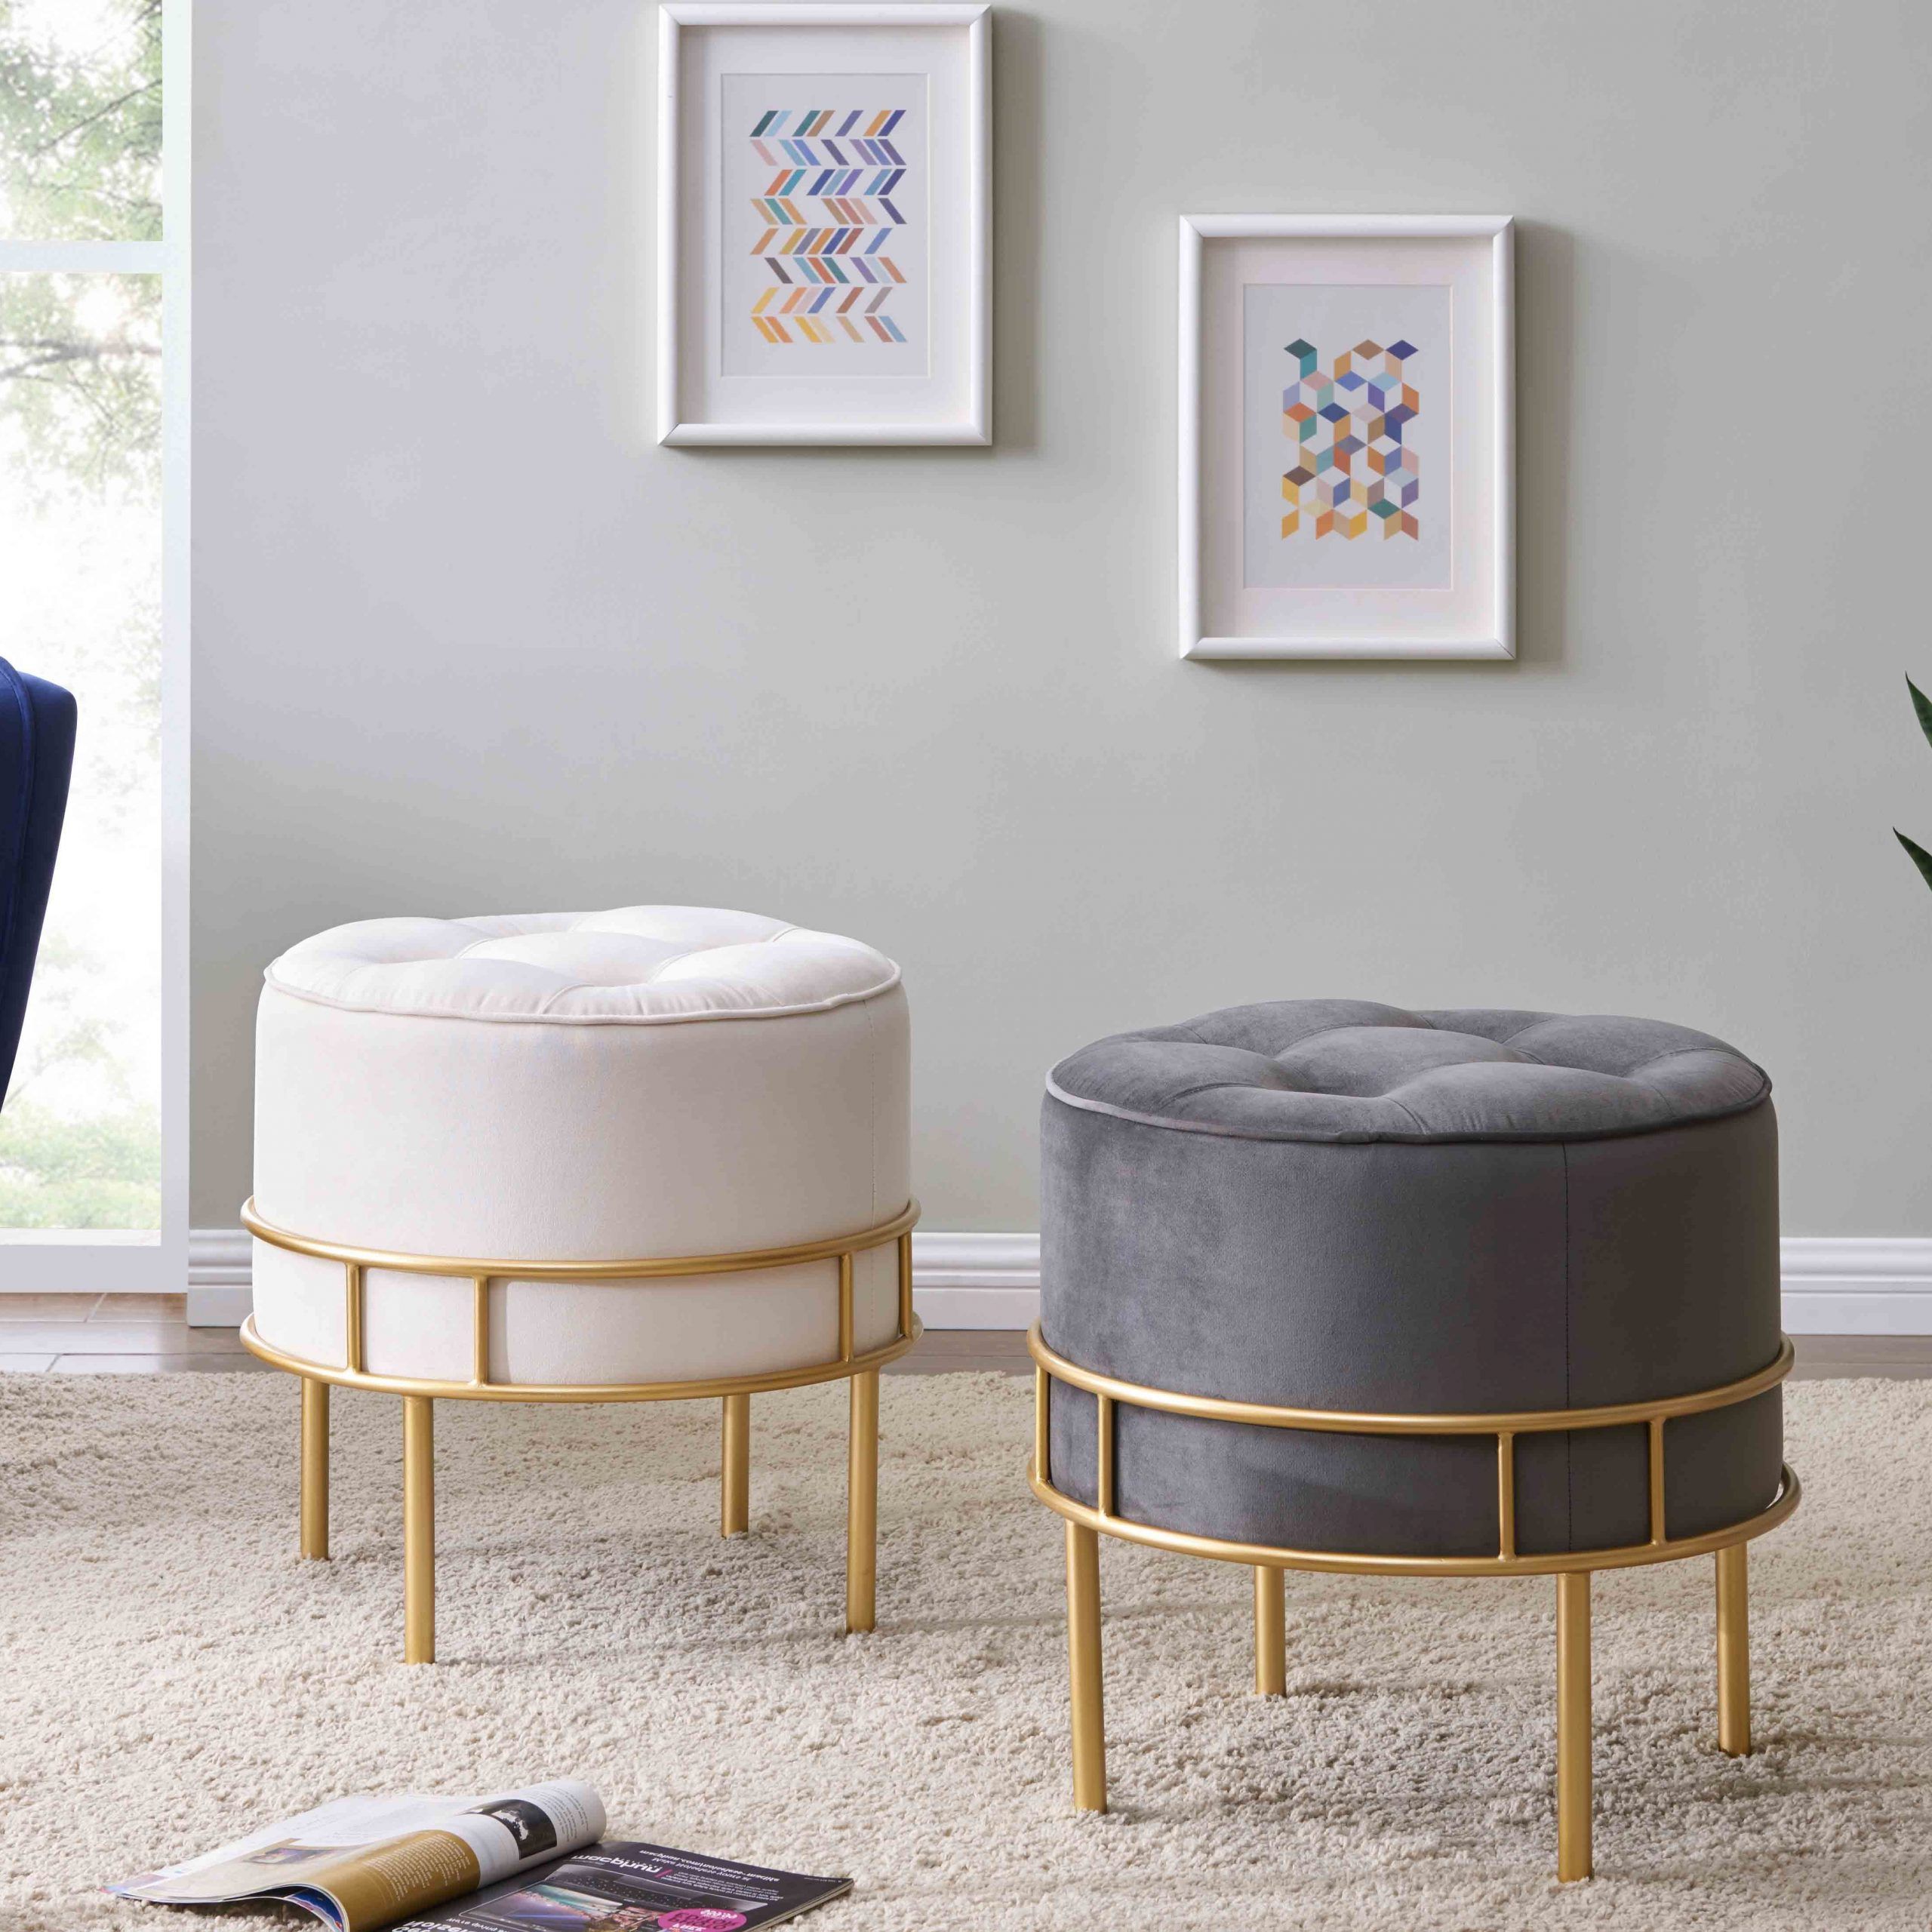 Trendy Cream Wool Felted Pouf Ottomans Within Lorient Velvet Fabric Tufted Round Ottoman, Serene Light Cream/ Gold Or (View 7 of 10)